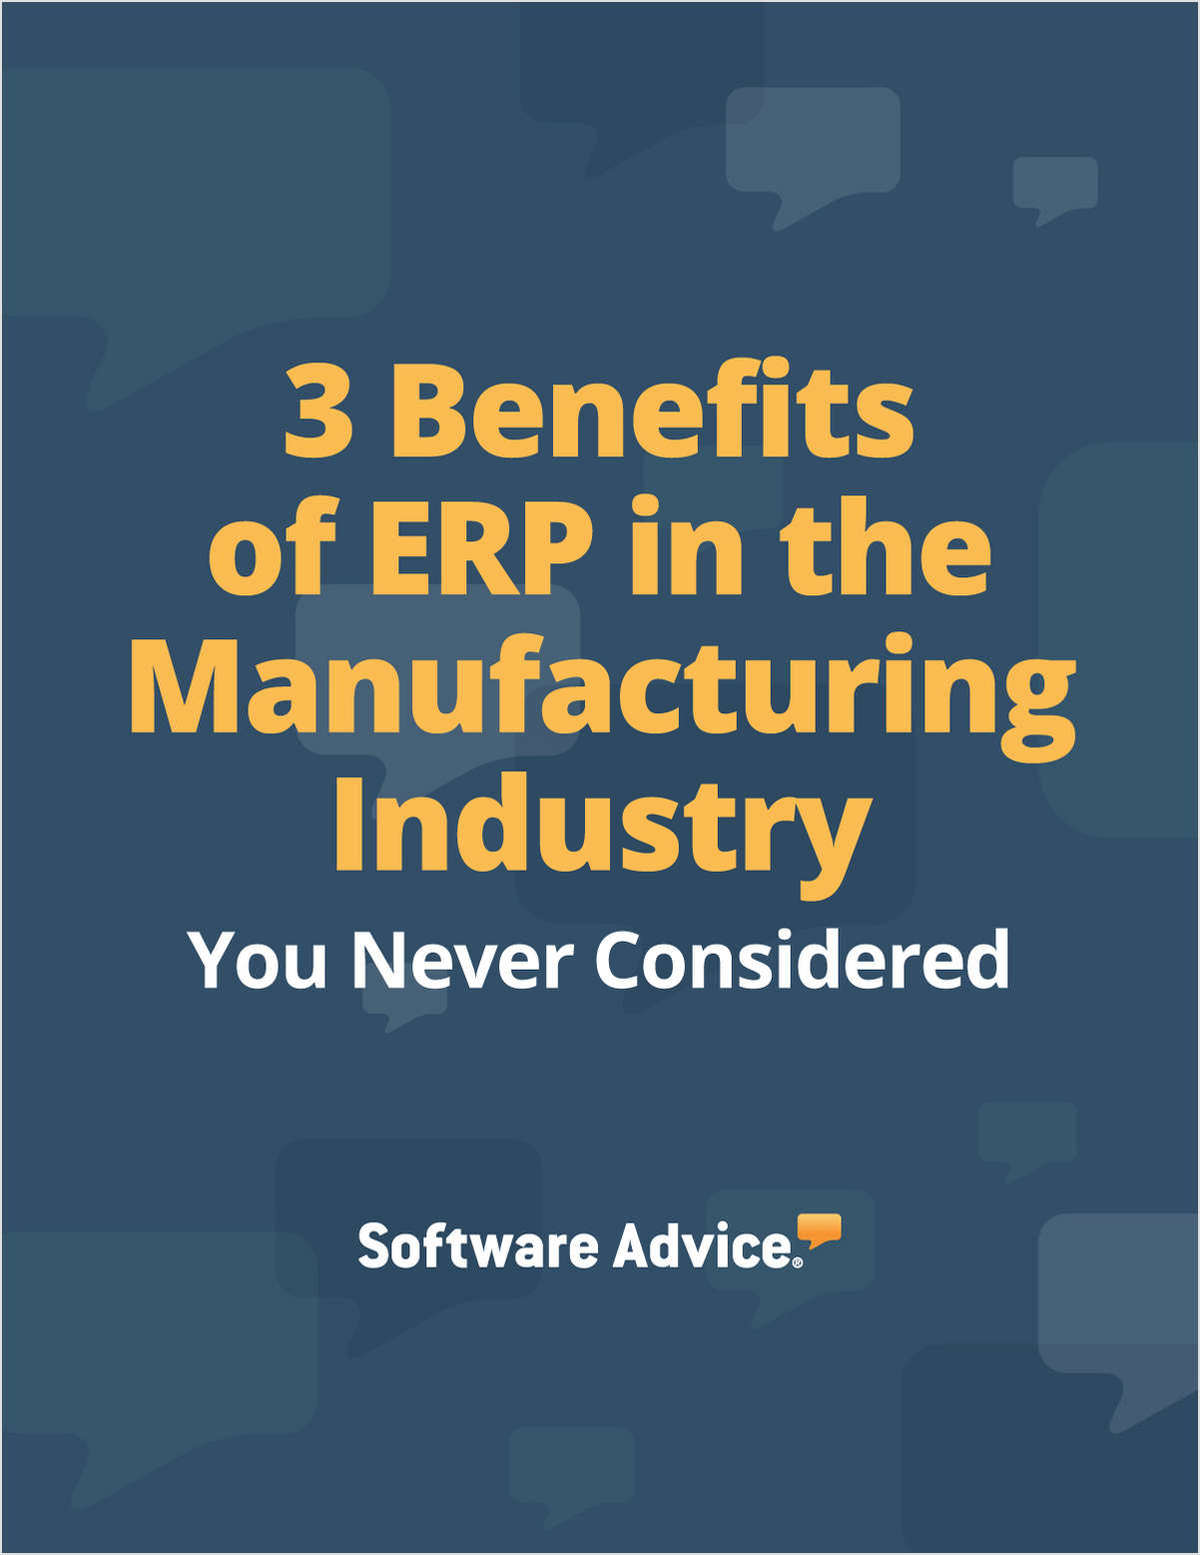 3 Benefits of ERP in the Manufacturing Industry You Never Considered